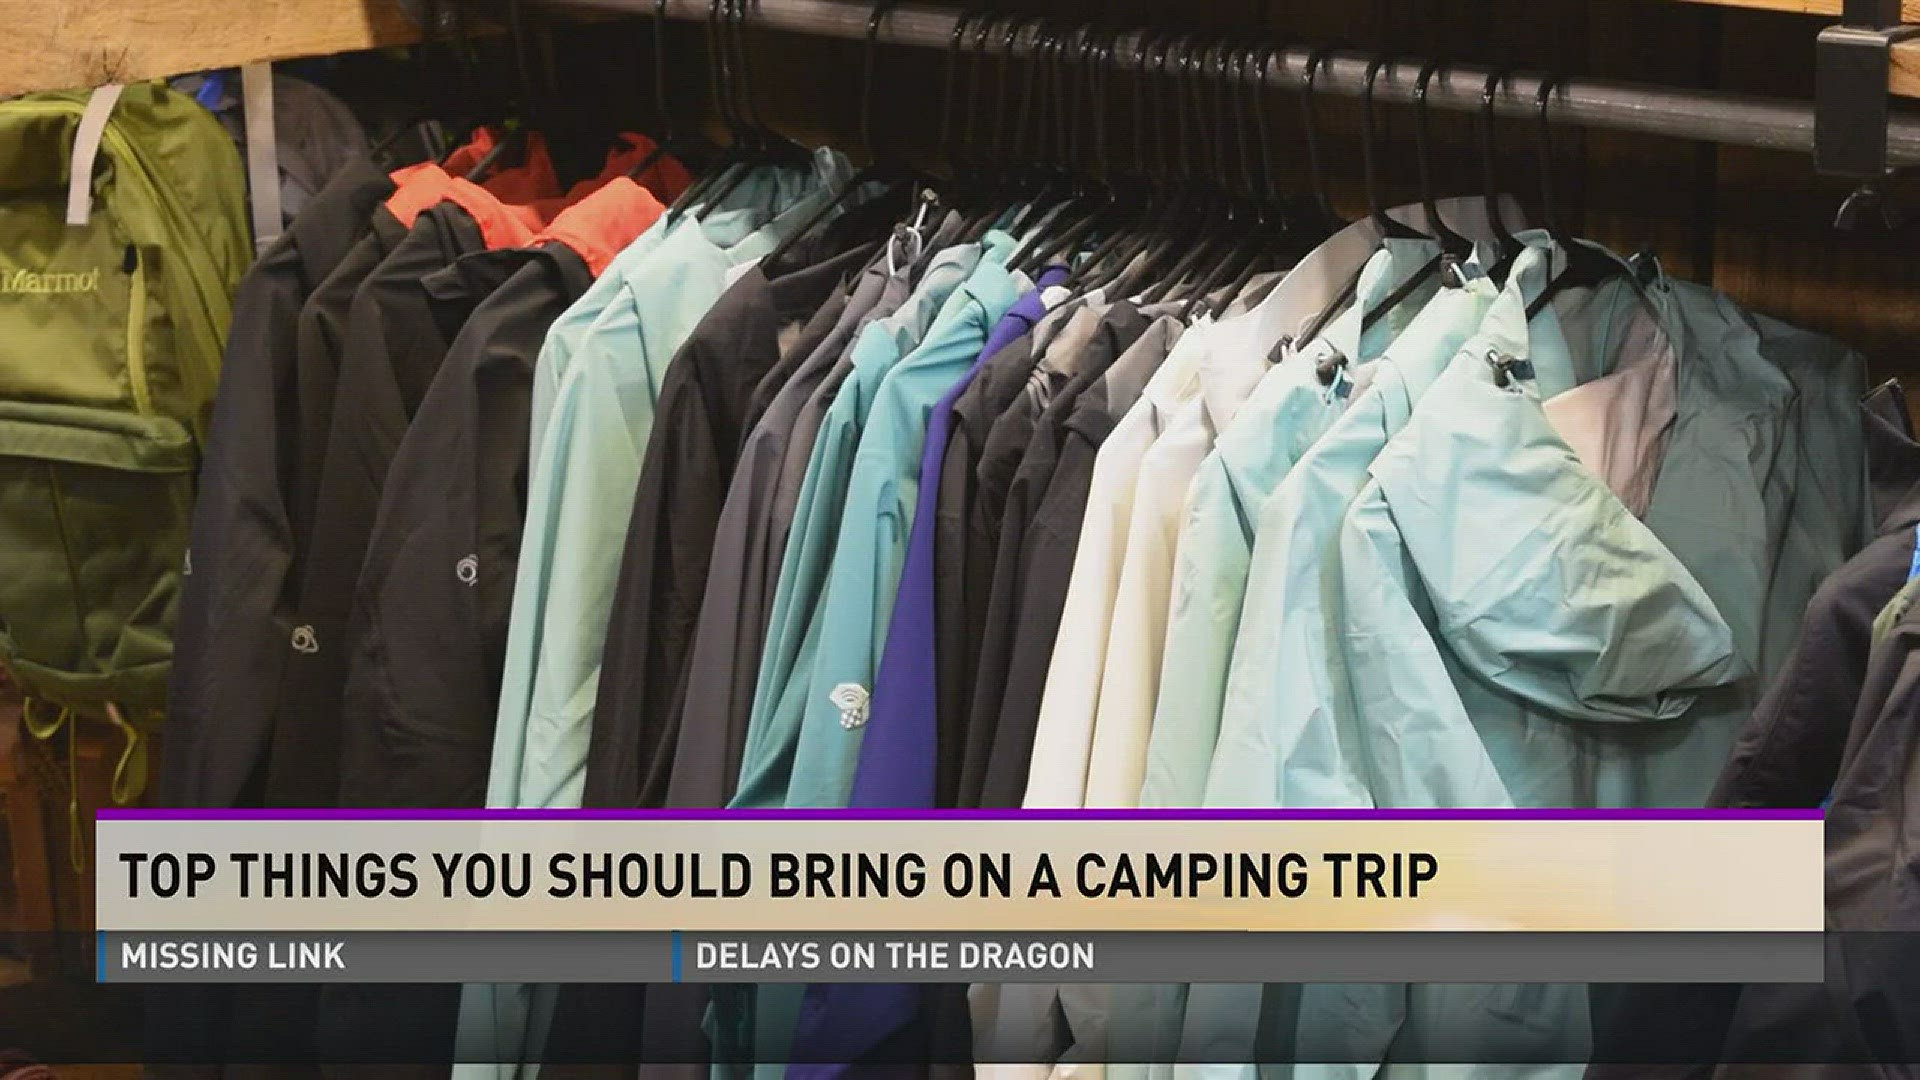 The top things you should bring on a camping trip.